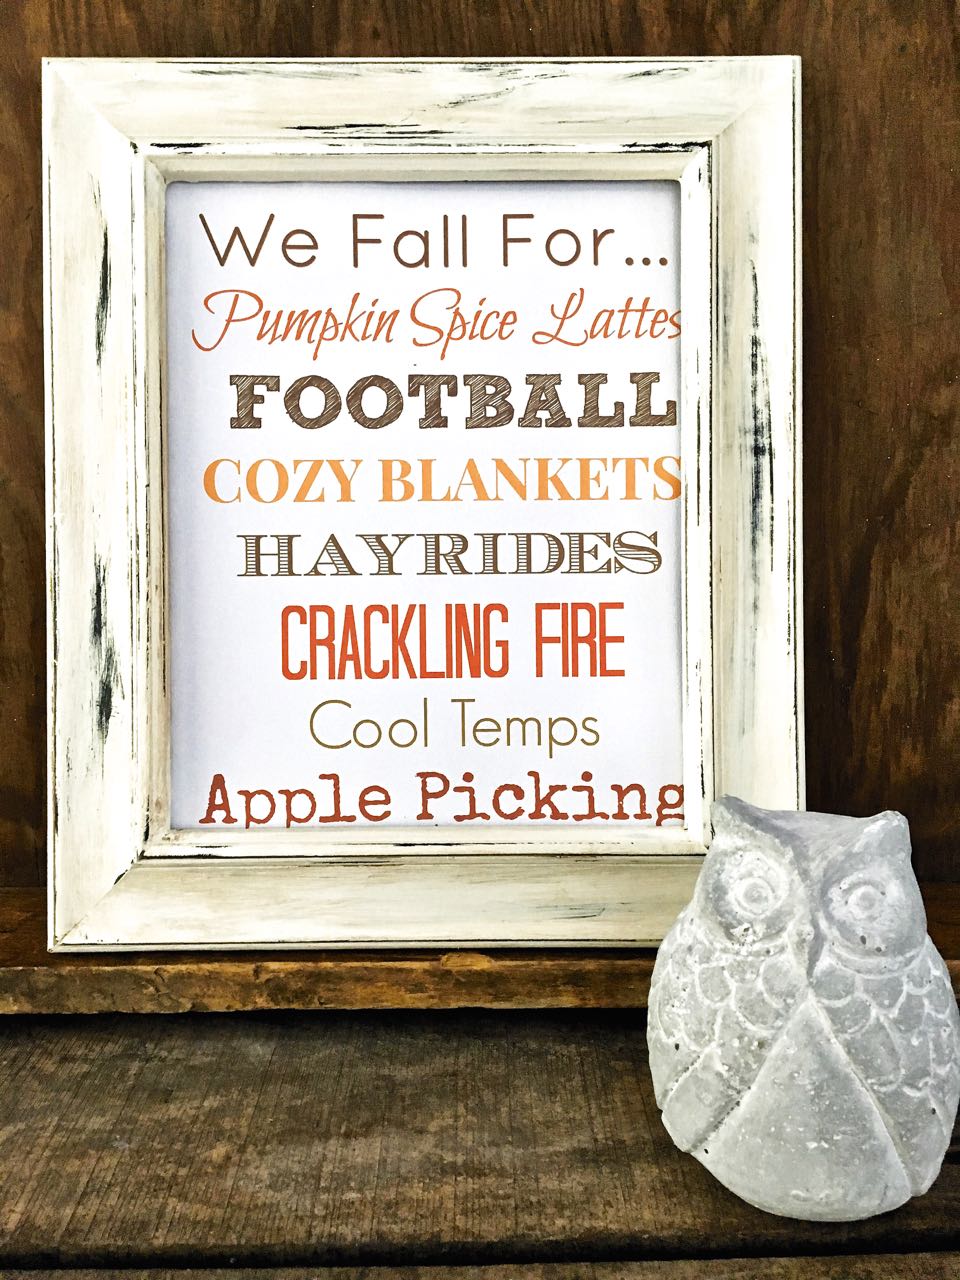 Painted Frame Makeover and a Free Fall Printable